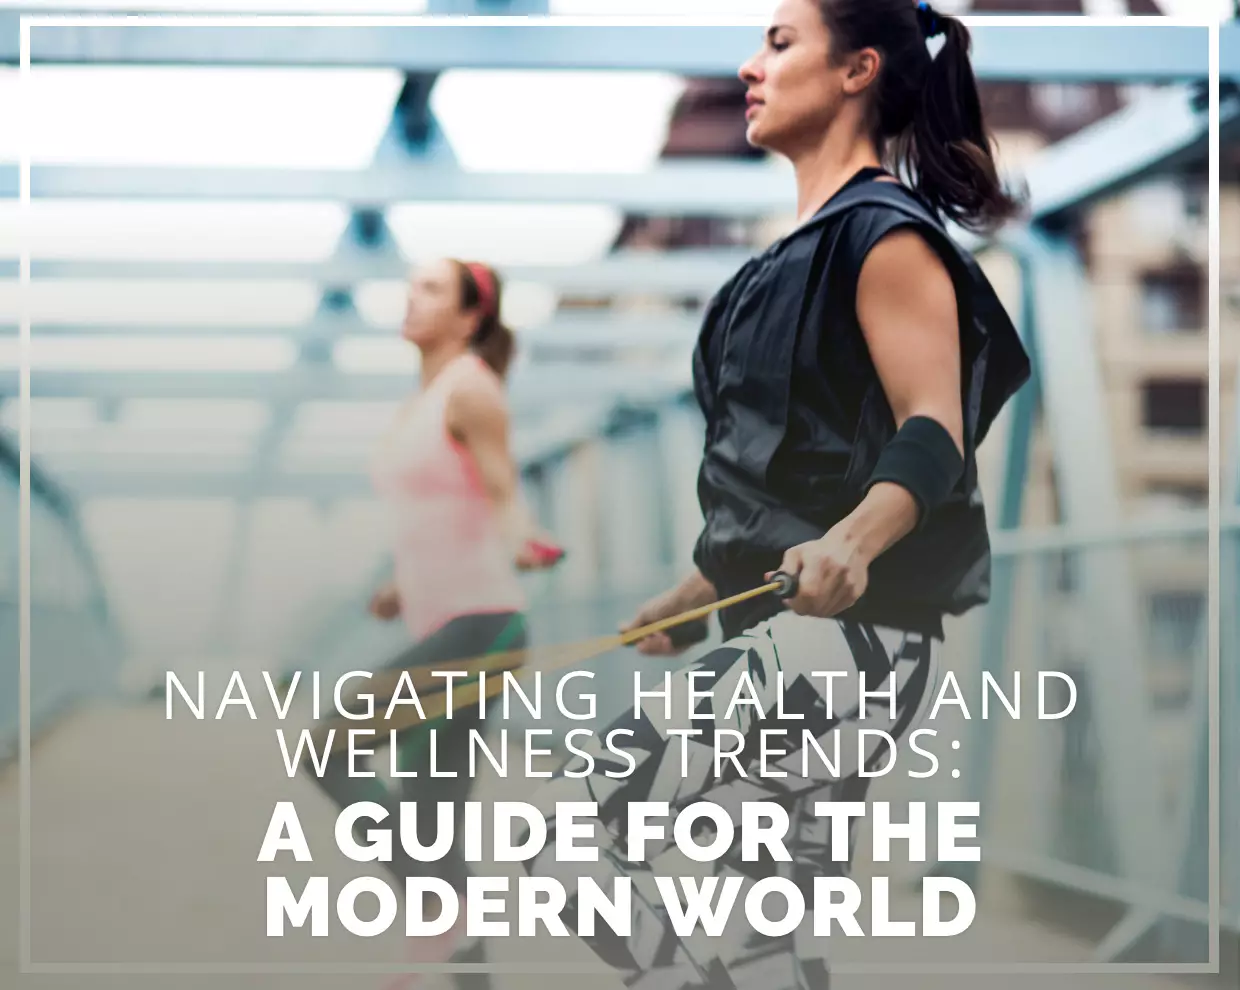 Navigating Health and Wellness Trends: A Guide for the Modern World